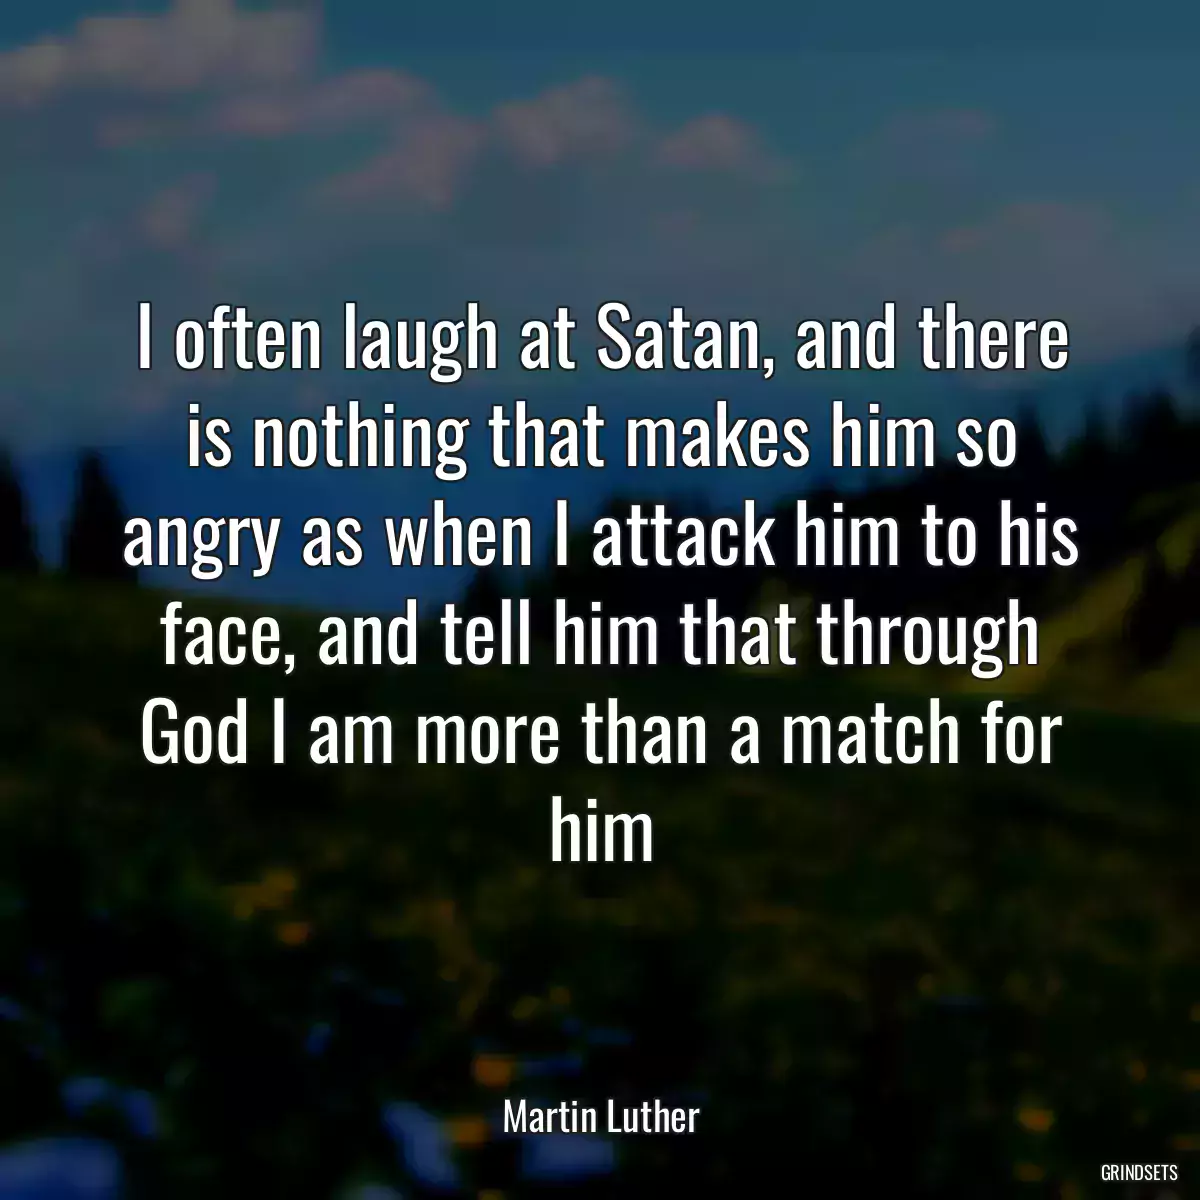 I often laugh at Satan, and there is nothing that makes him so angry as when I attack him to his face, and tell him that through God I am more than a match for him